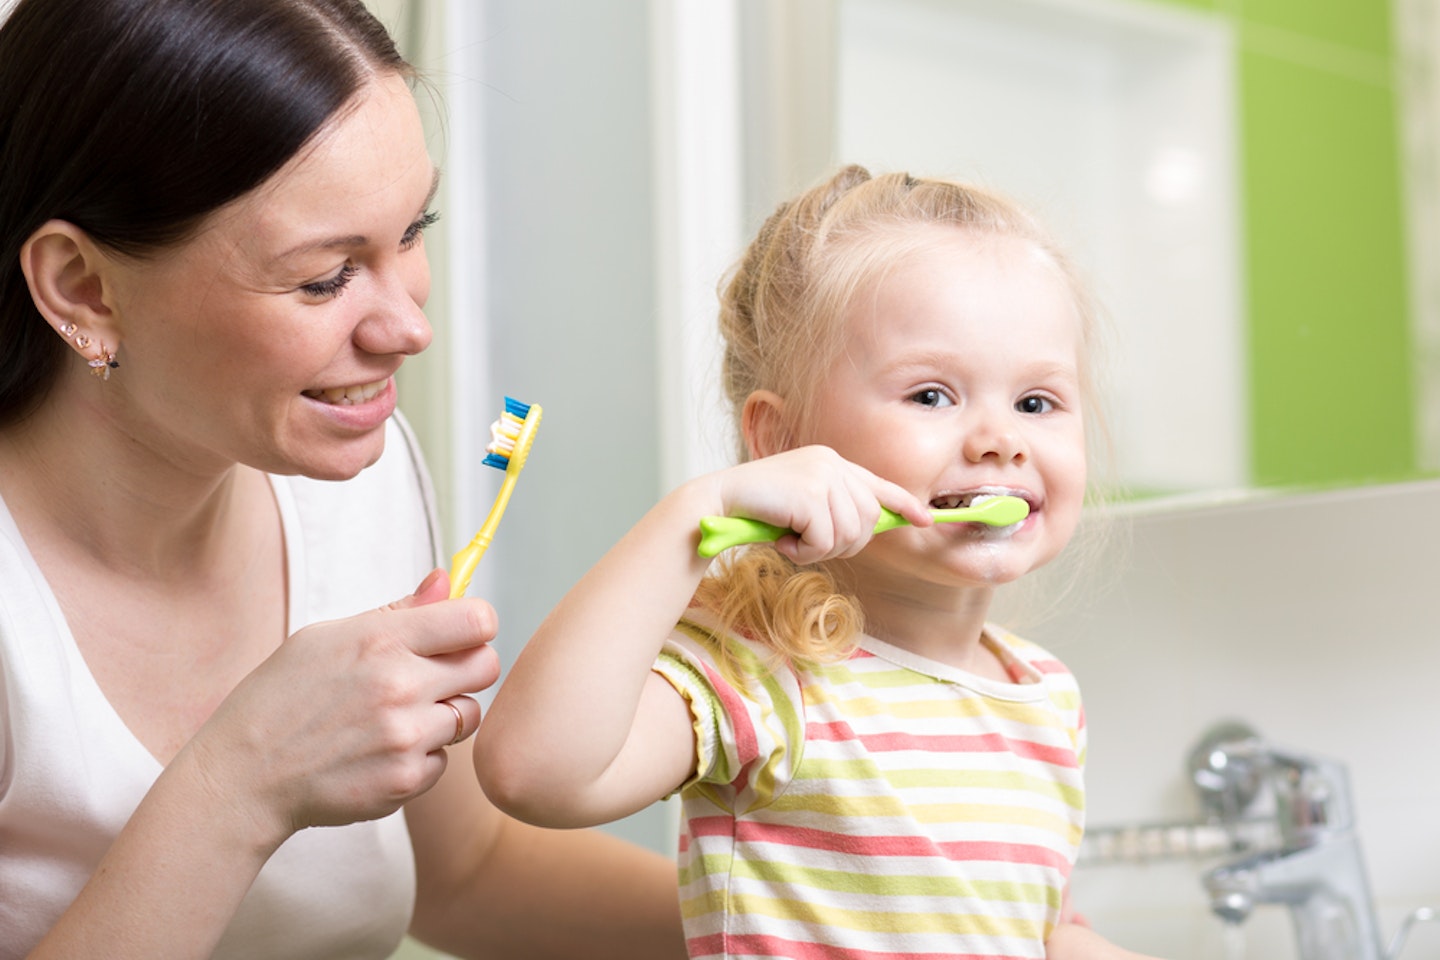 mum and toddler brushing their teeth together